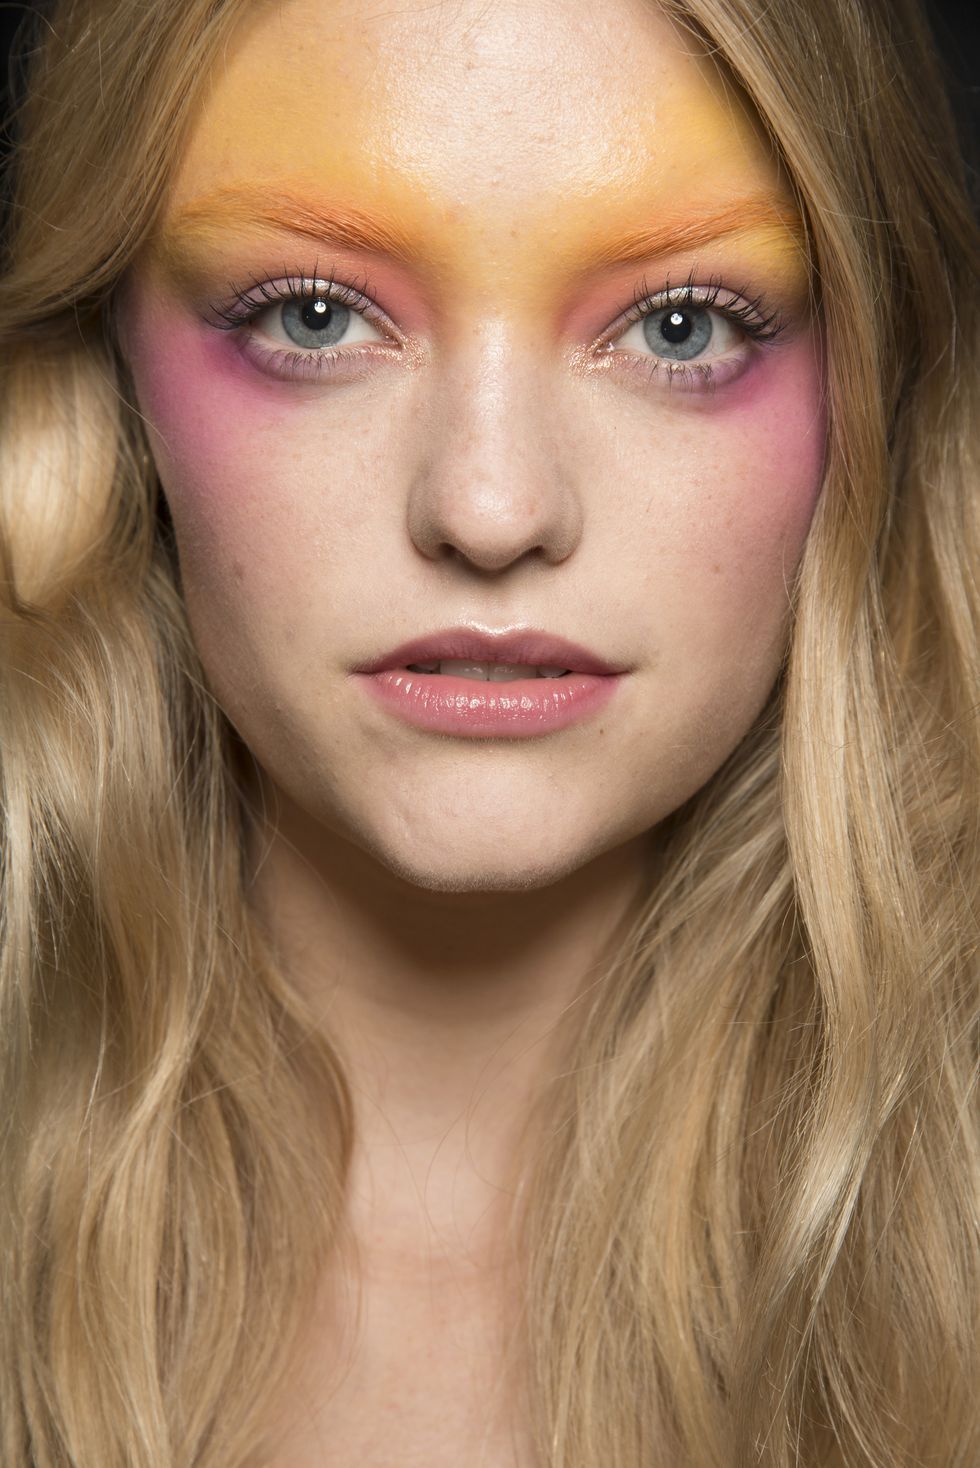 The Best Makeup Looks Spring 2019 - Backstage Beauty Looks Spring 2019